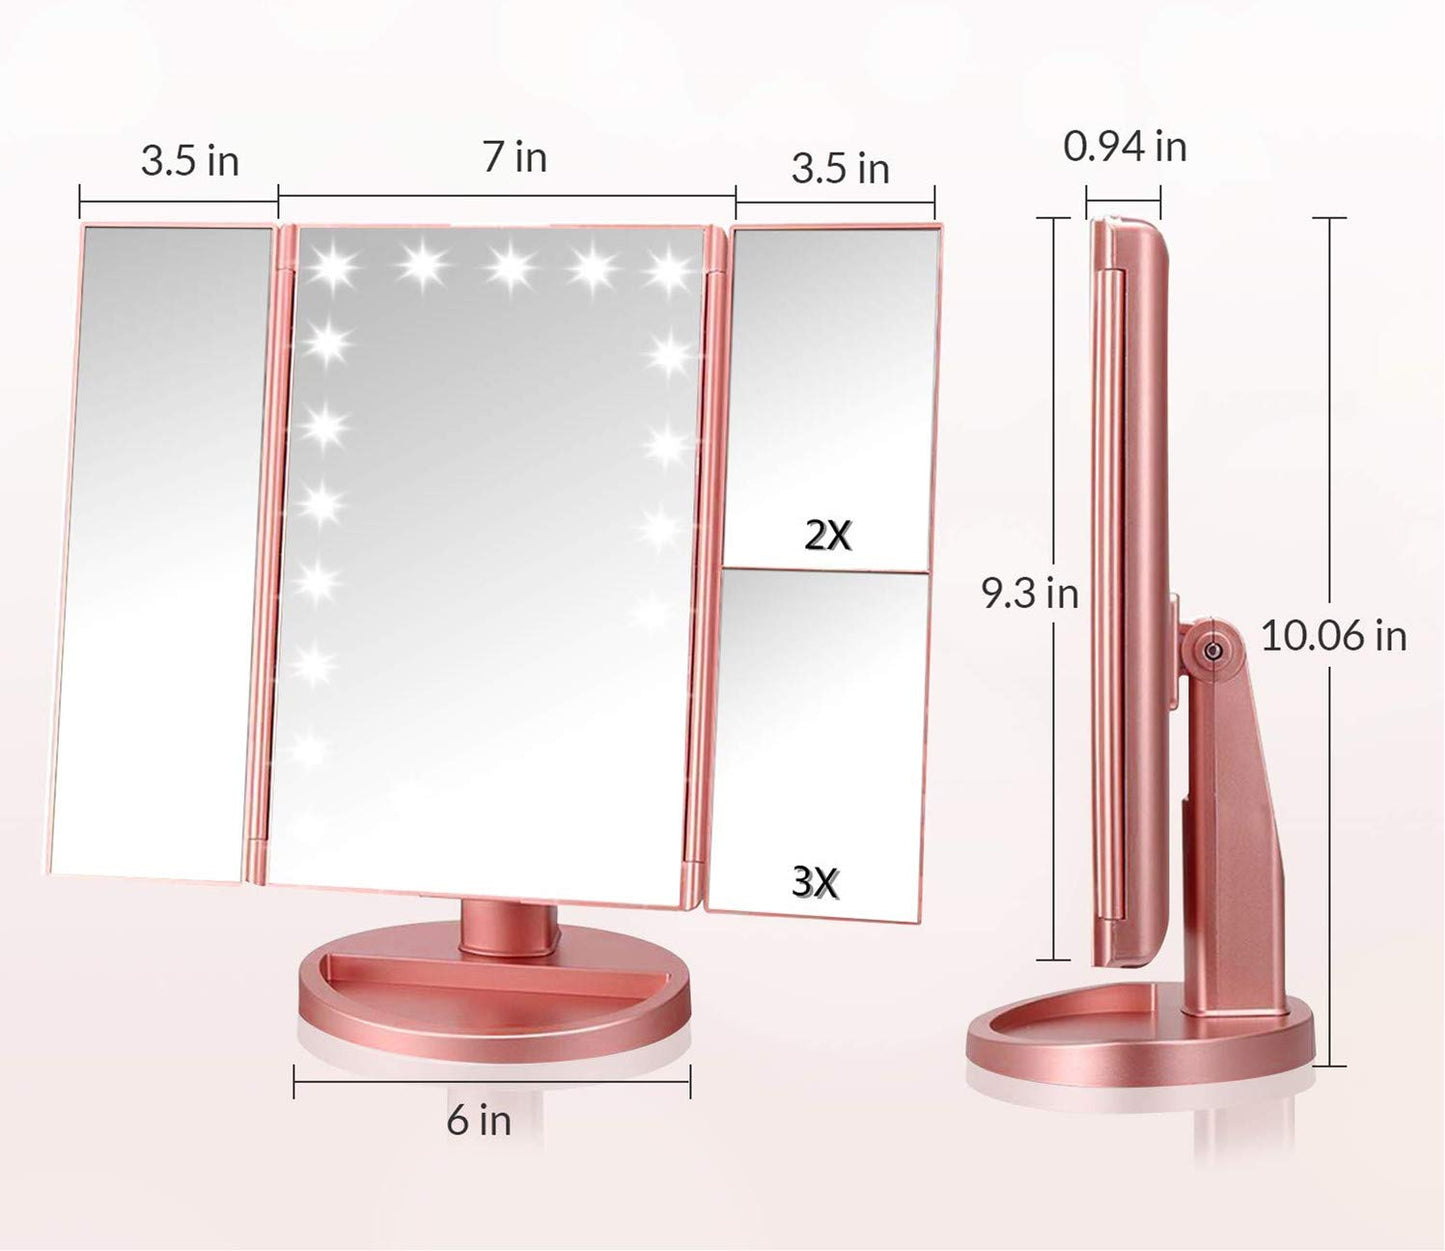 Infitrans 3 Folds Lighted Vanity Makeup Mirror,1X/2X/3X Magnification, 21 LED Light Bright Table Mirror with Touch Screen,180 Adjustable Rotation,Portable Travel Cosmetic Mirror